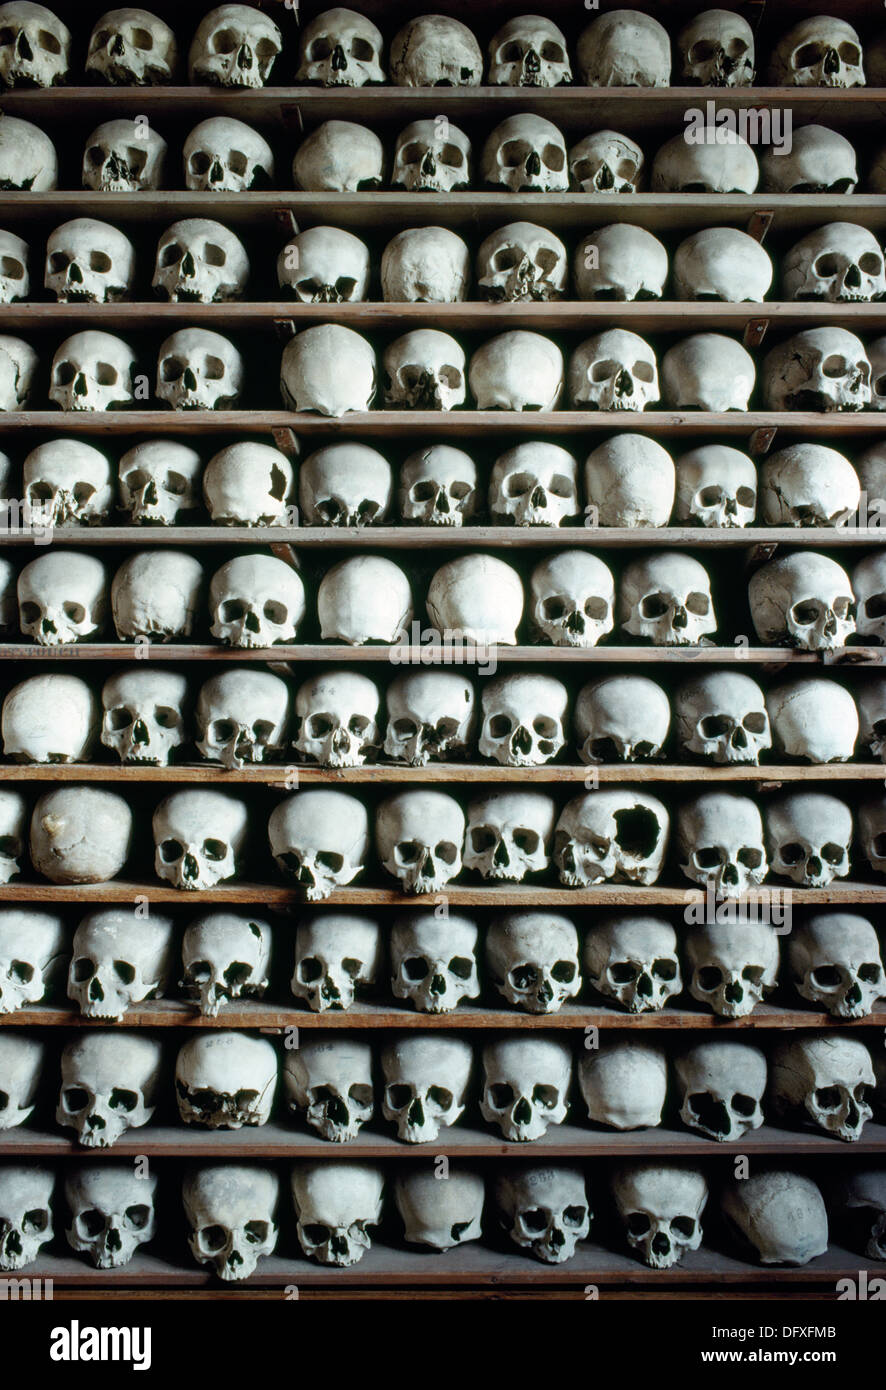 Part of a collection of c.1200 human skulls & thigh bone representing some 2000 individuals stacked in the Crypt of St Leonard's Church, Hythe, Kent. Stock Photo